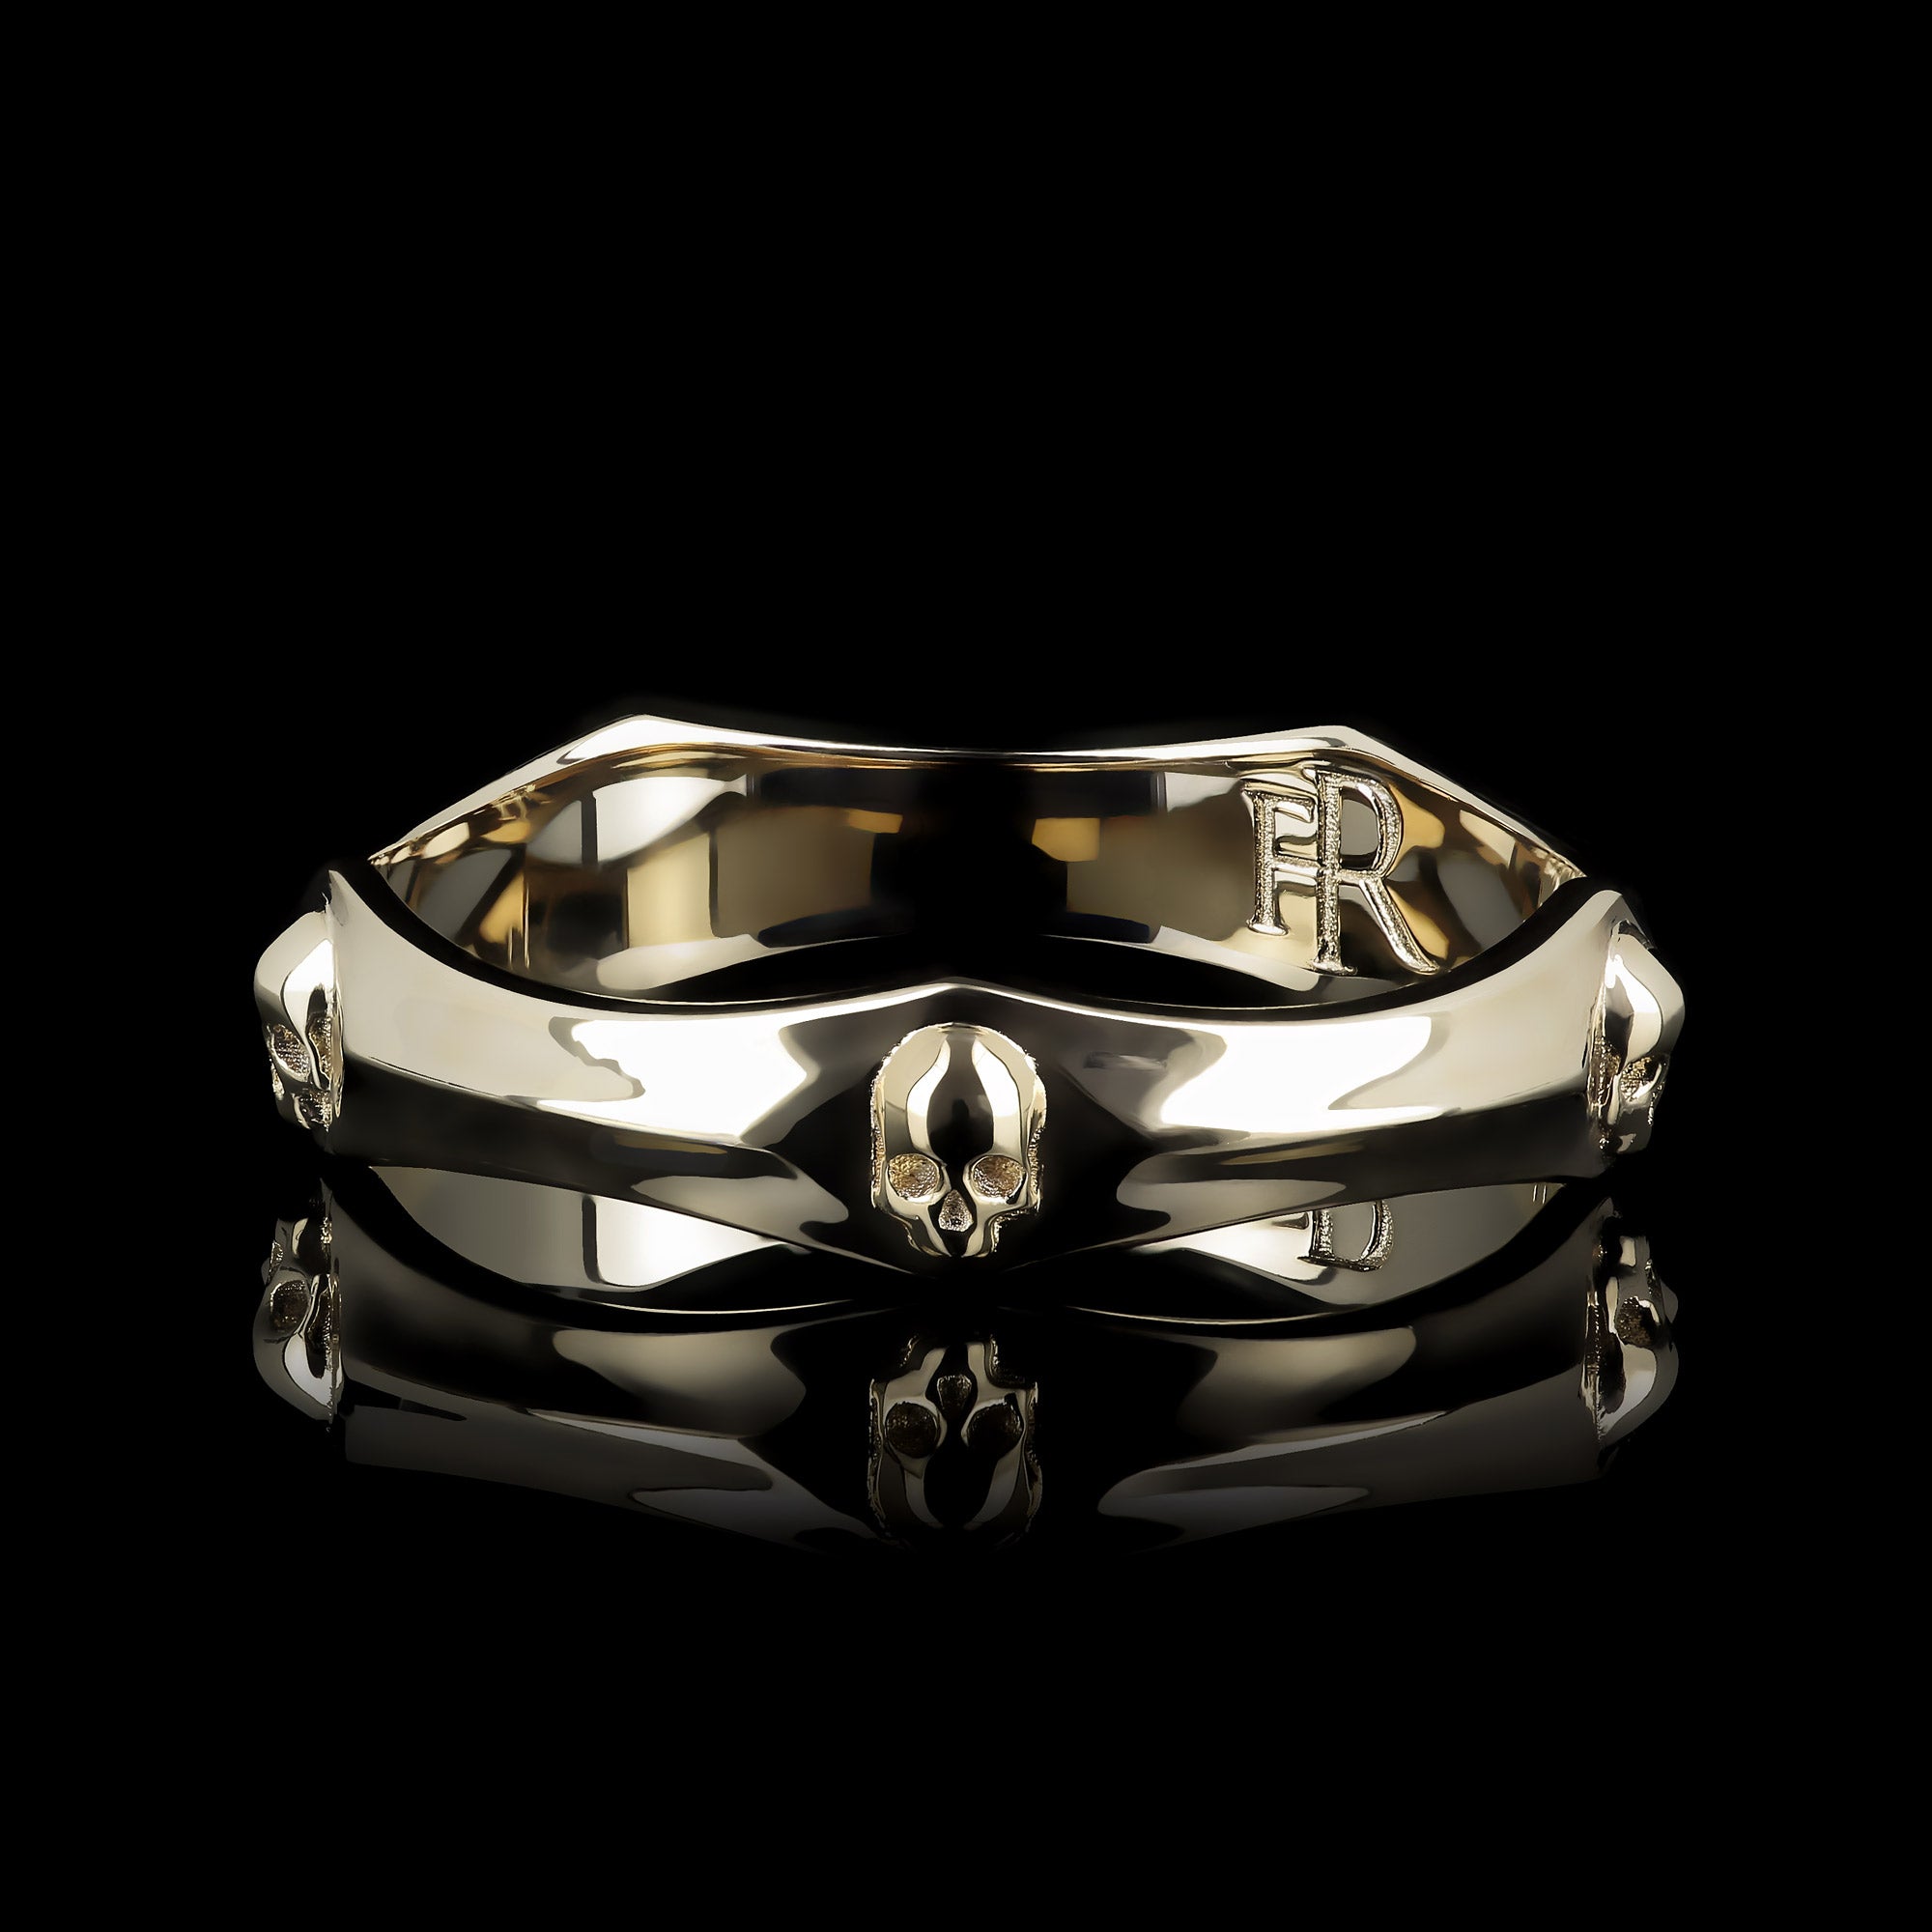 Royal Corsaire Gold edition - 18k yellow vermeil ring